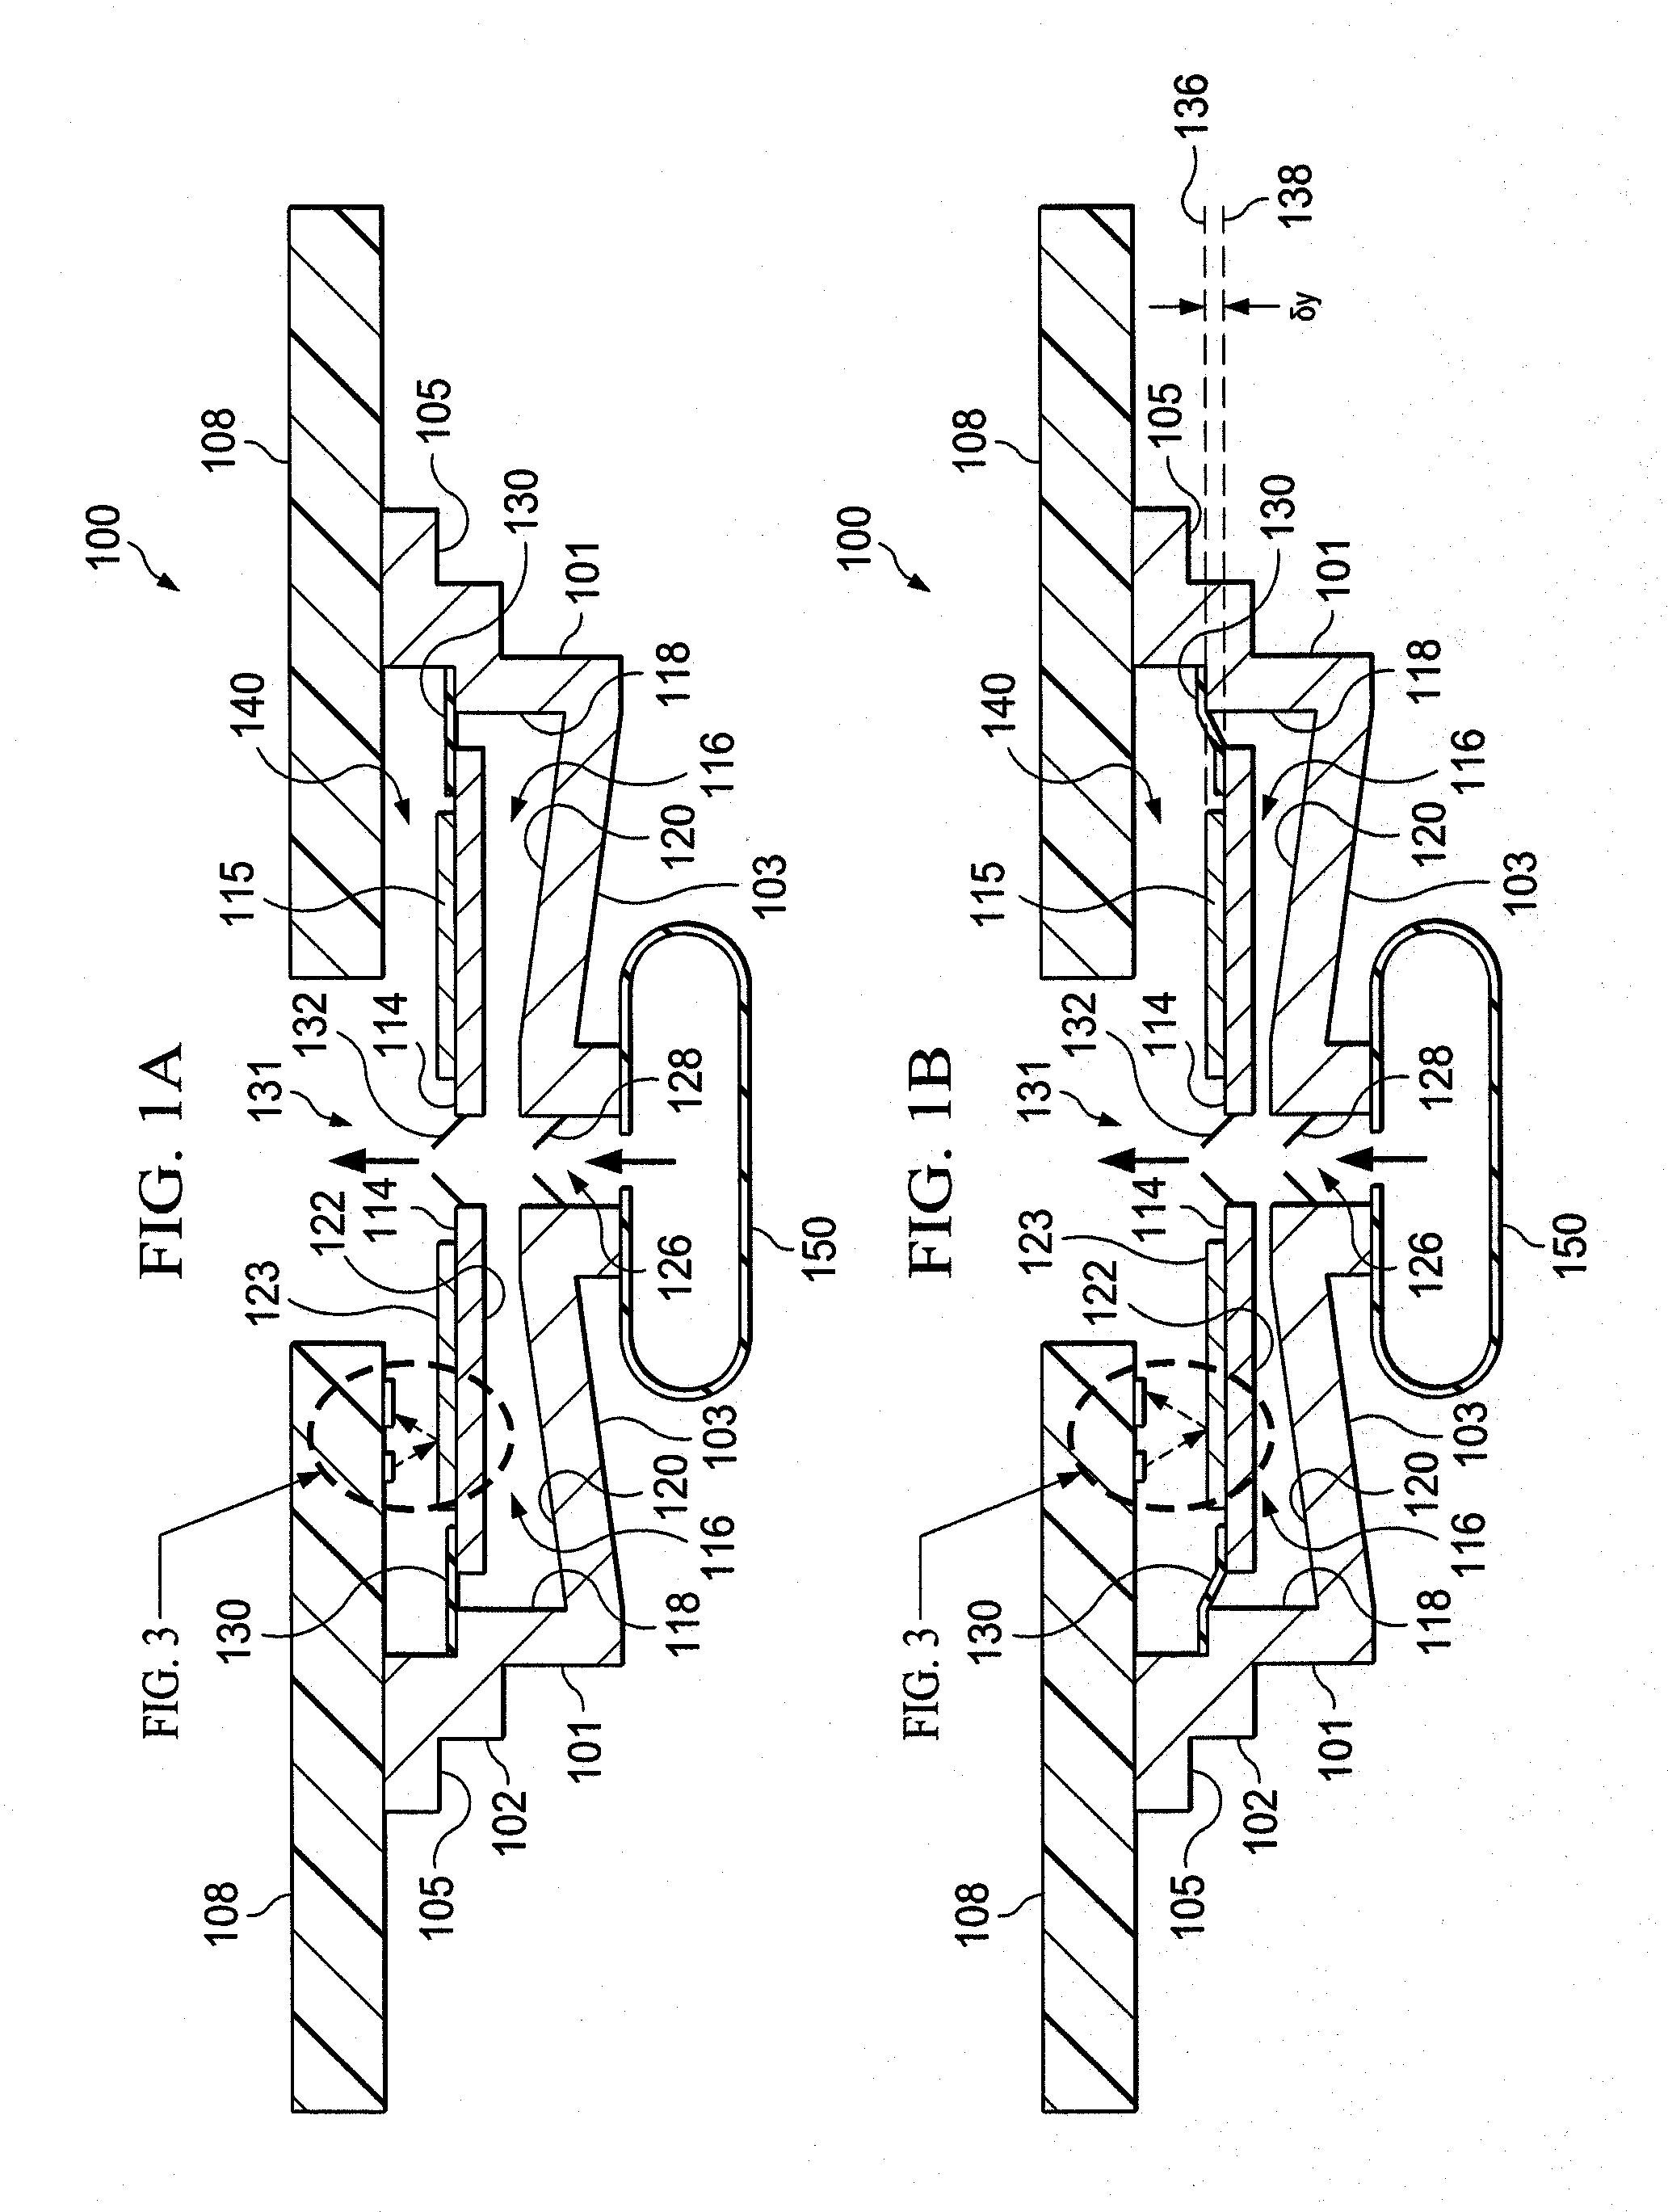 System and method for measuring pressure applied by a piezo-electric pump